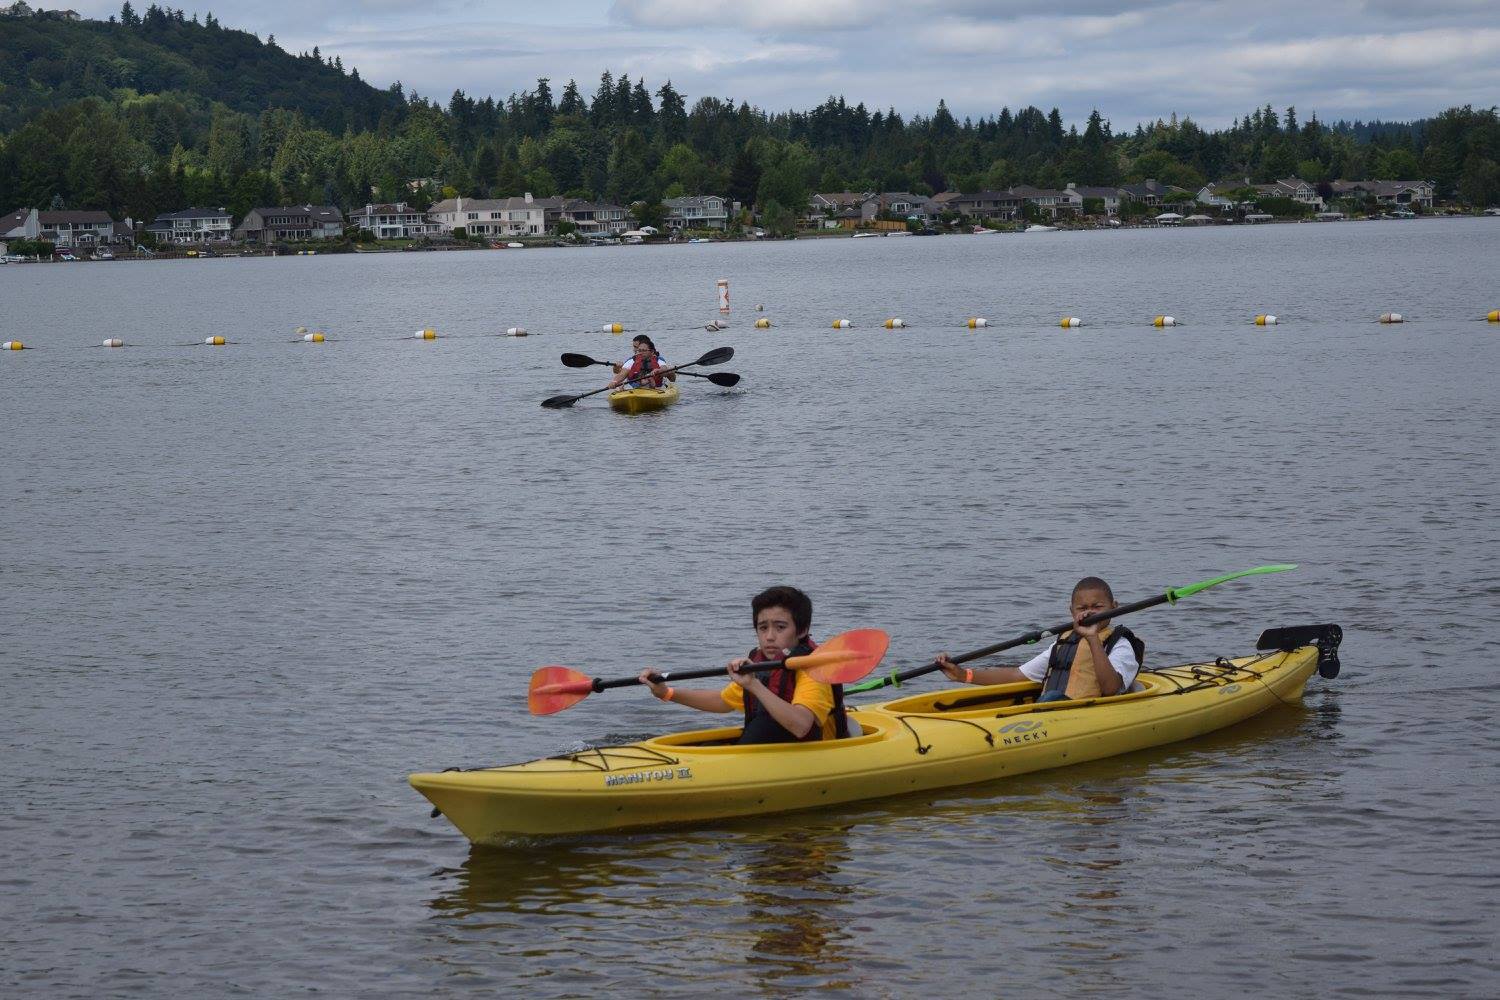 Open Doors for Multicultural Families held a kayaking event earlier this month at Lake Sammamish for its clients. Courtesy photo